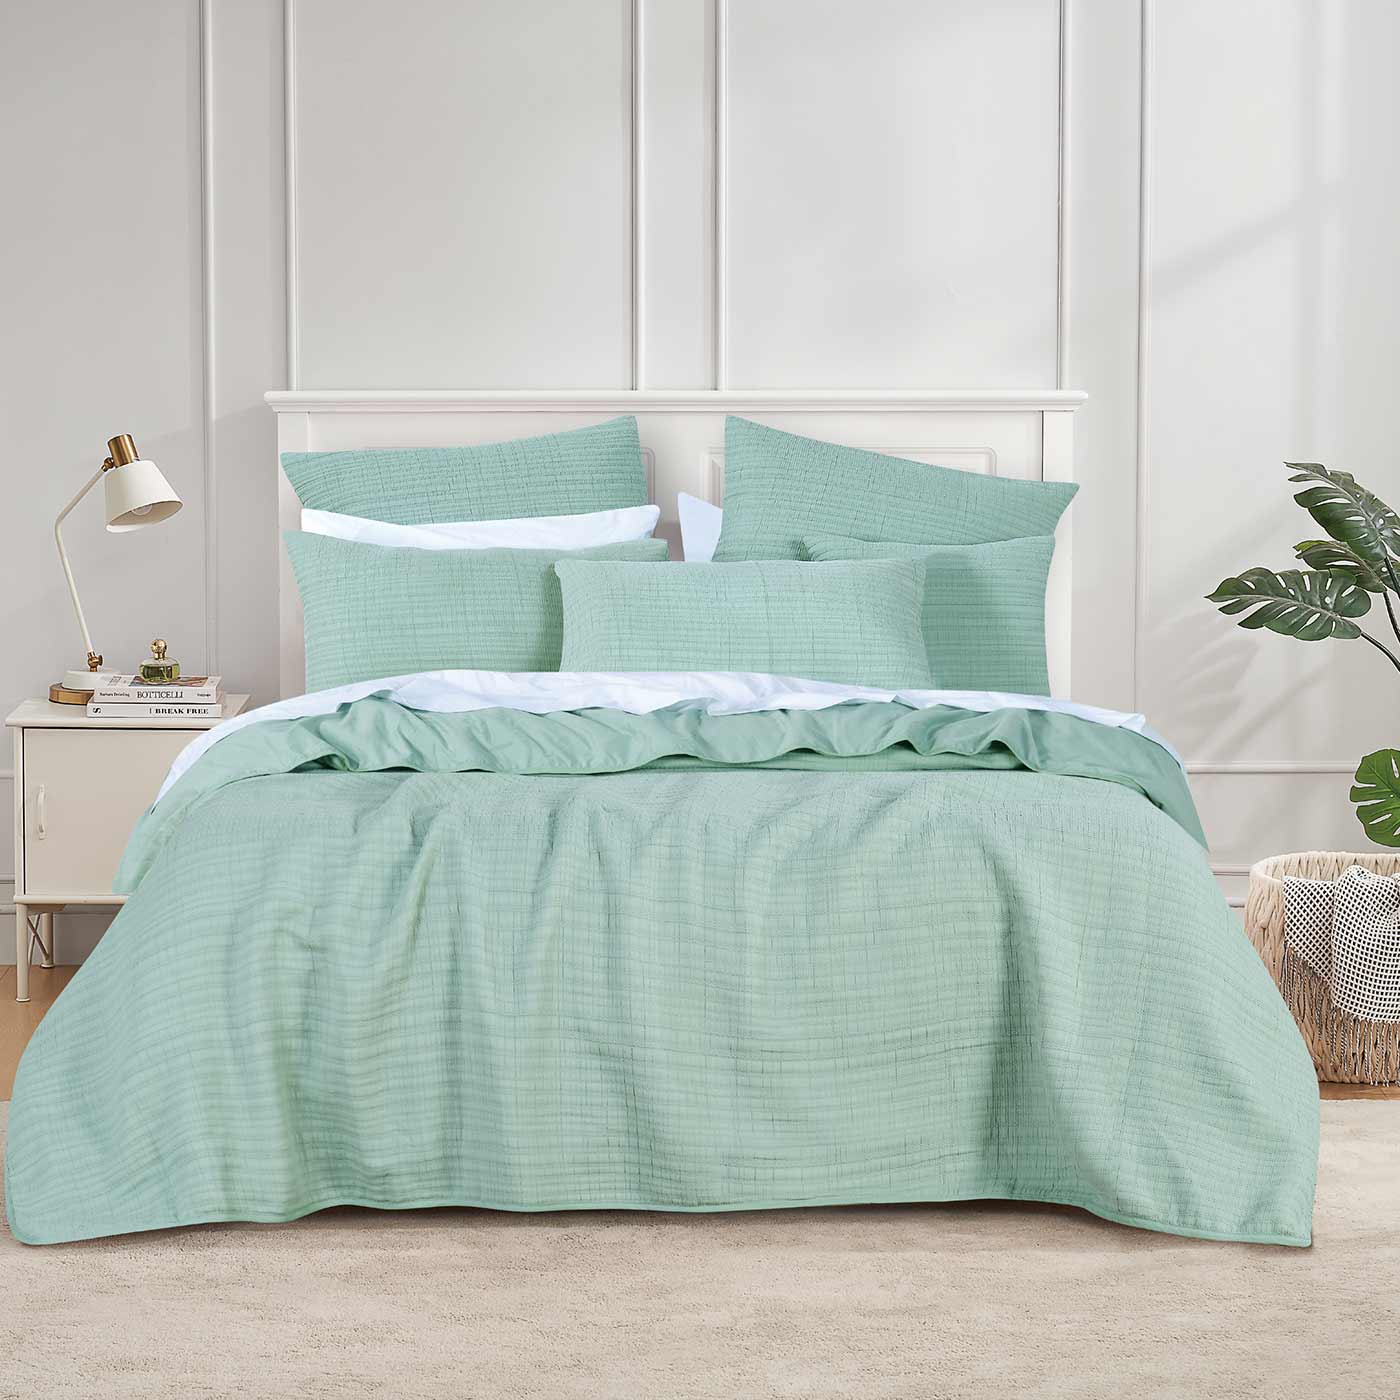 The Cressida coverlet set features a cotton fabric in an elegant and on trend sage colour. Incredibly soft to touch, this quilted coverlet is the perfect addition to liven up your bedroom space.